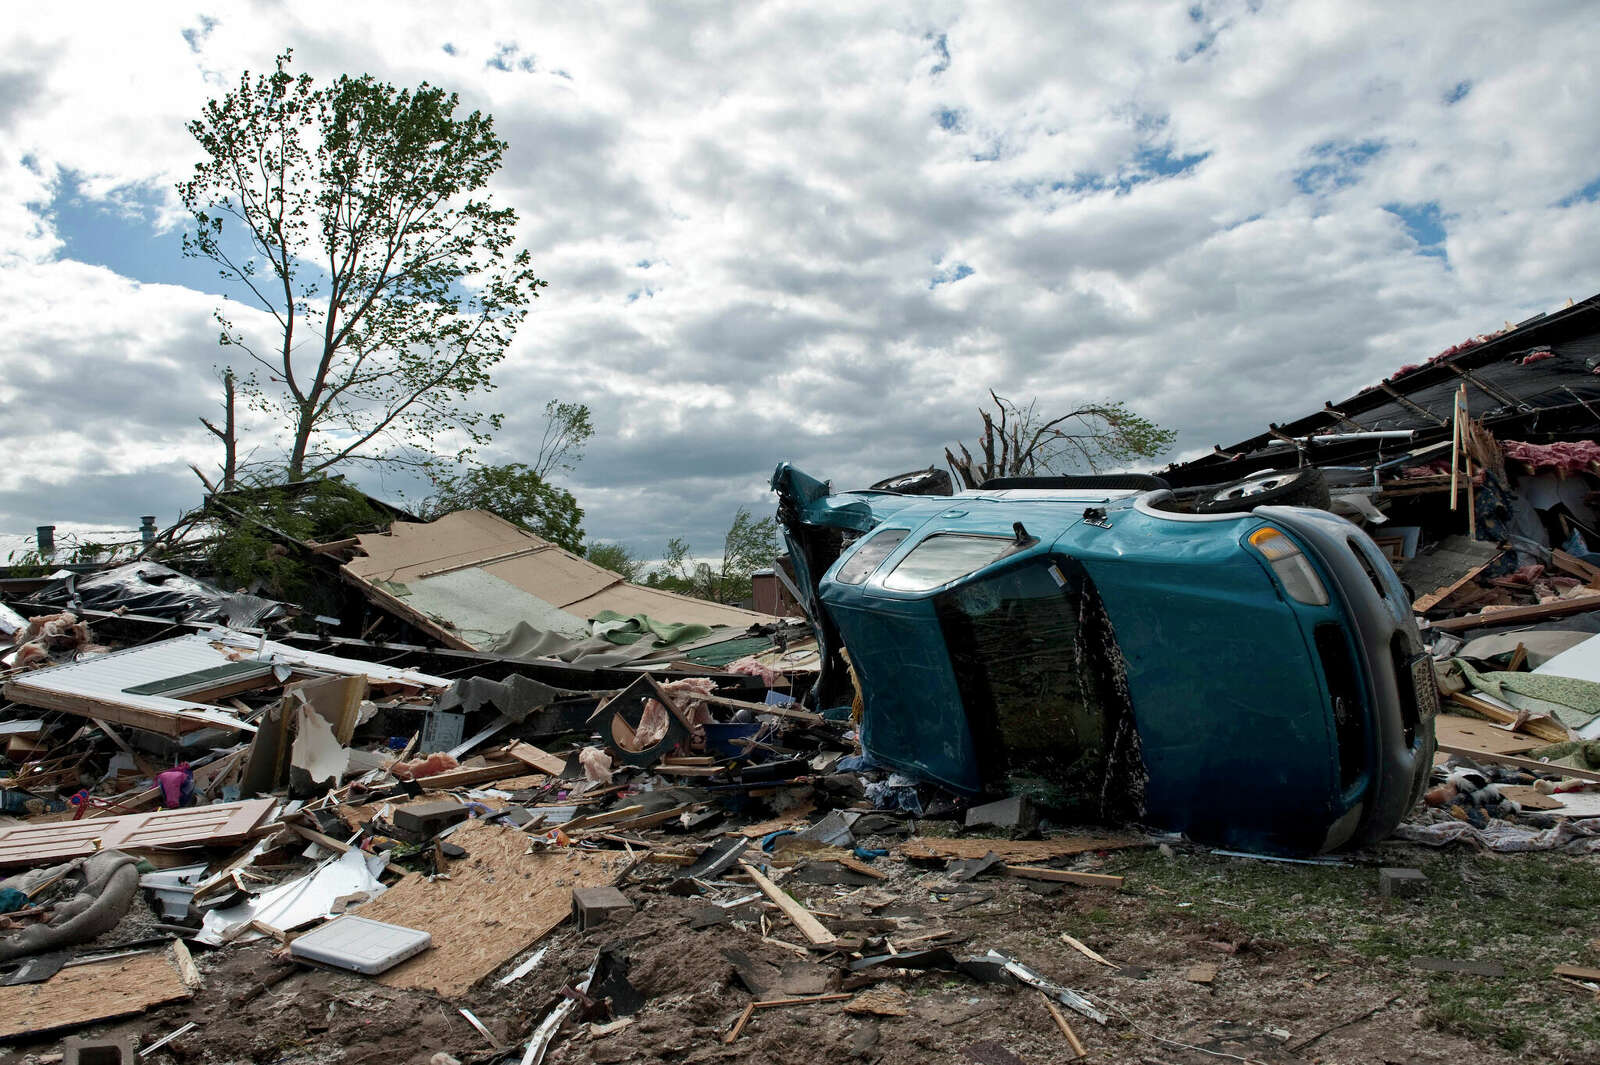 Damage including a car on its side is seen after an EF3 tornado swept through the Pinaire Mobile Home Park on April 15, 2012 in Wichita, Kansas.